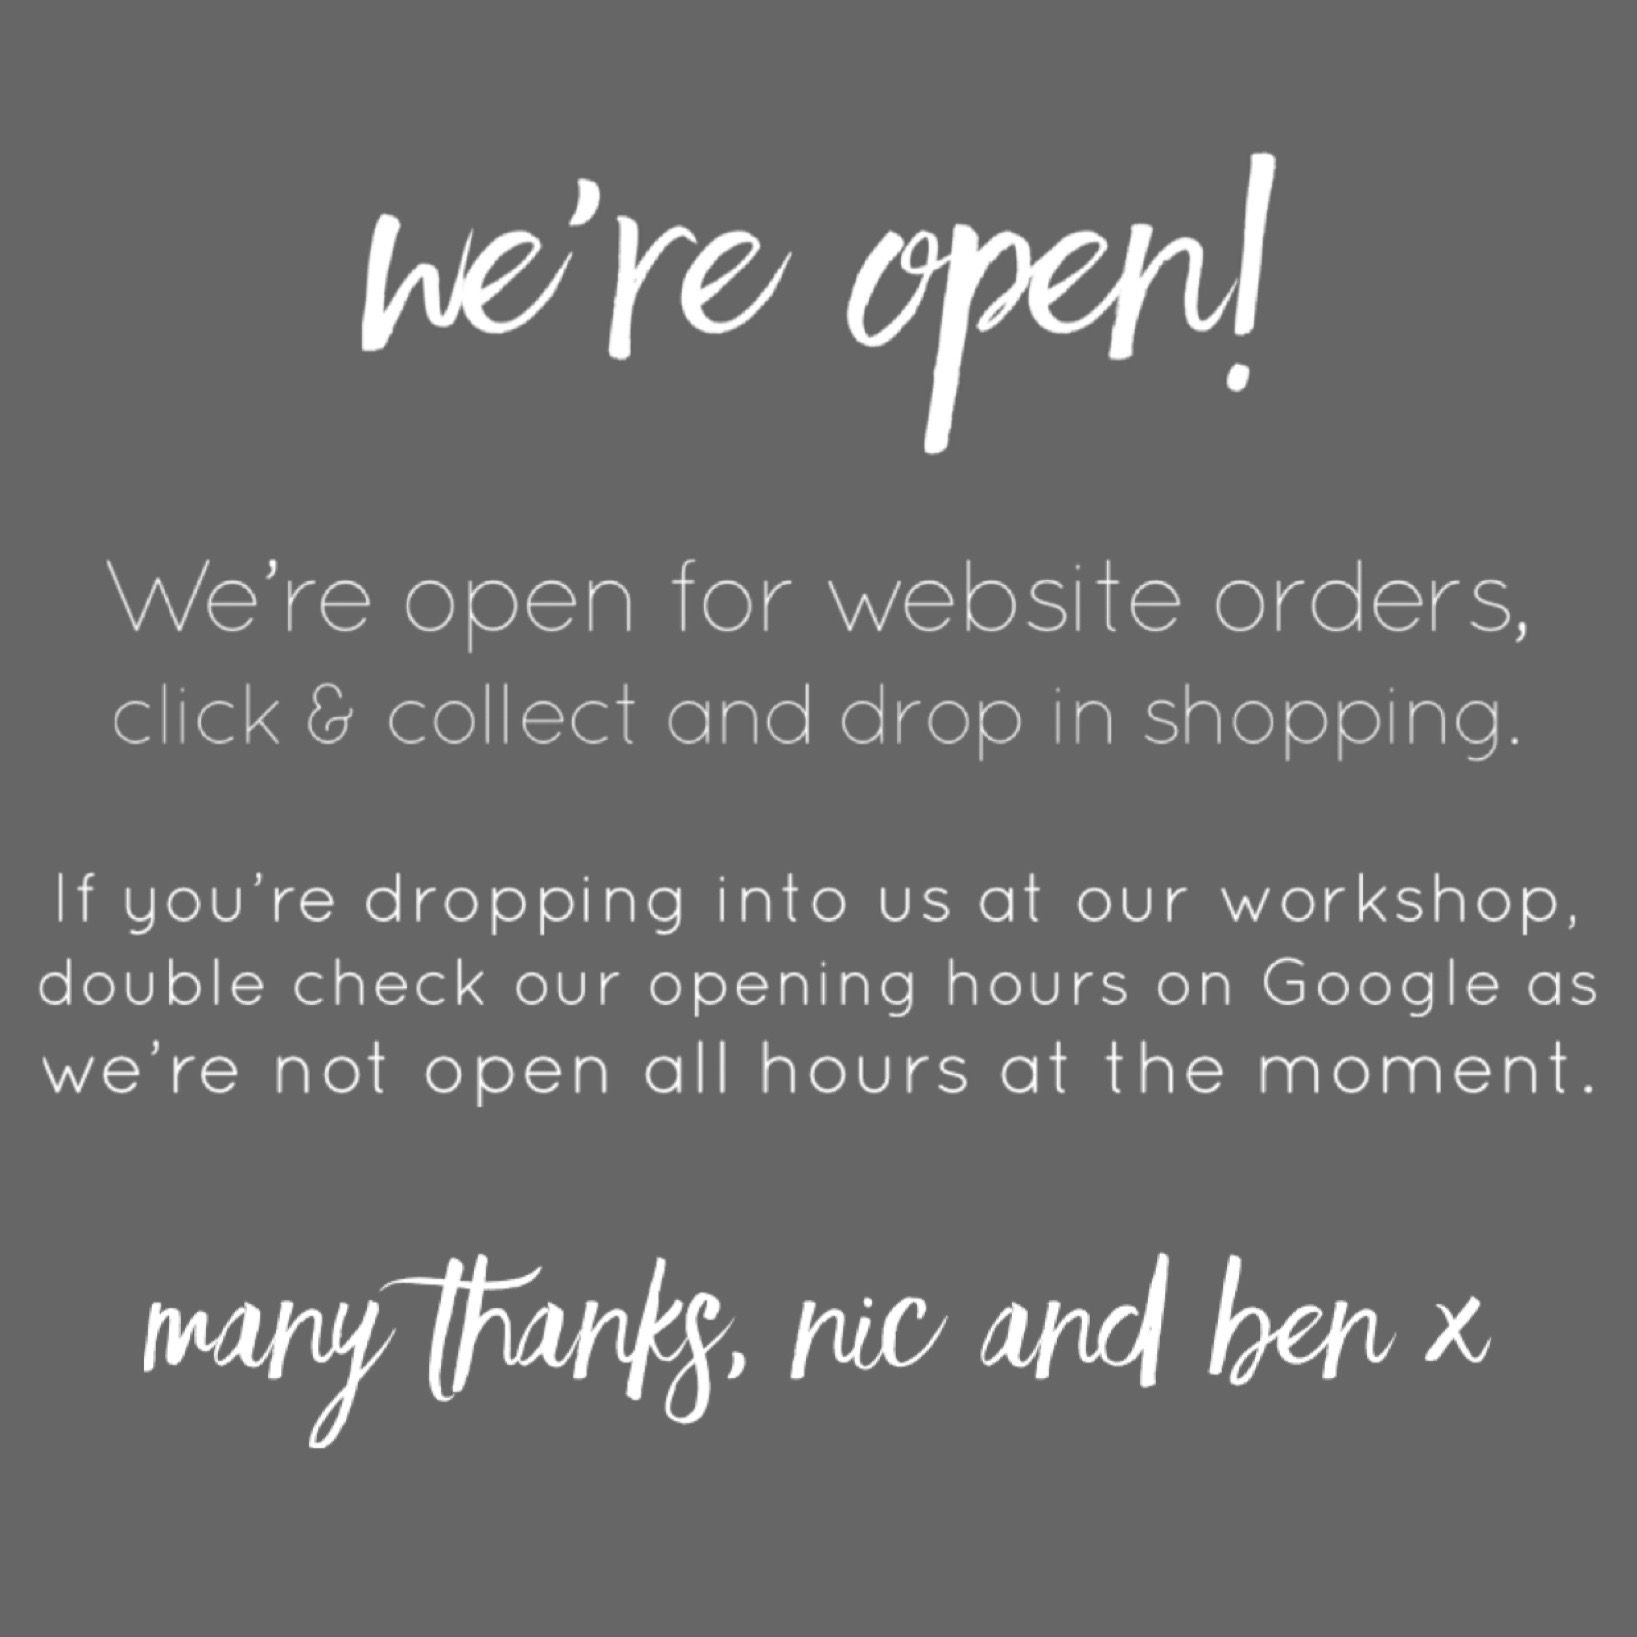 We're open for website orders, click & collect and drop in shopping. If you're dropping into us at our workhop, double check our opening hours on Google as we're not open all hours at the moment. Many thanks, Nic & Ben